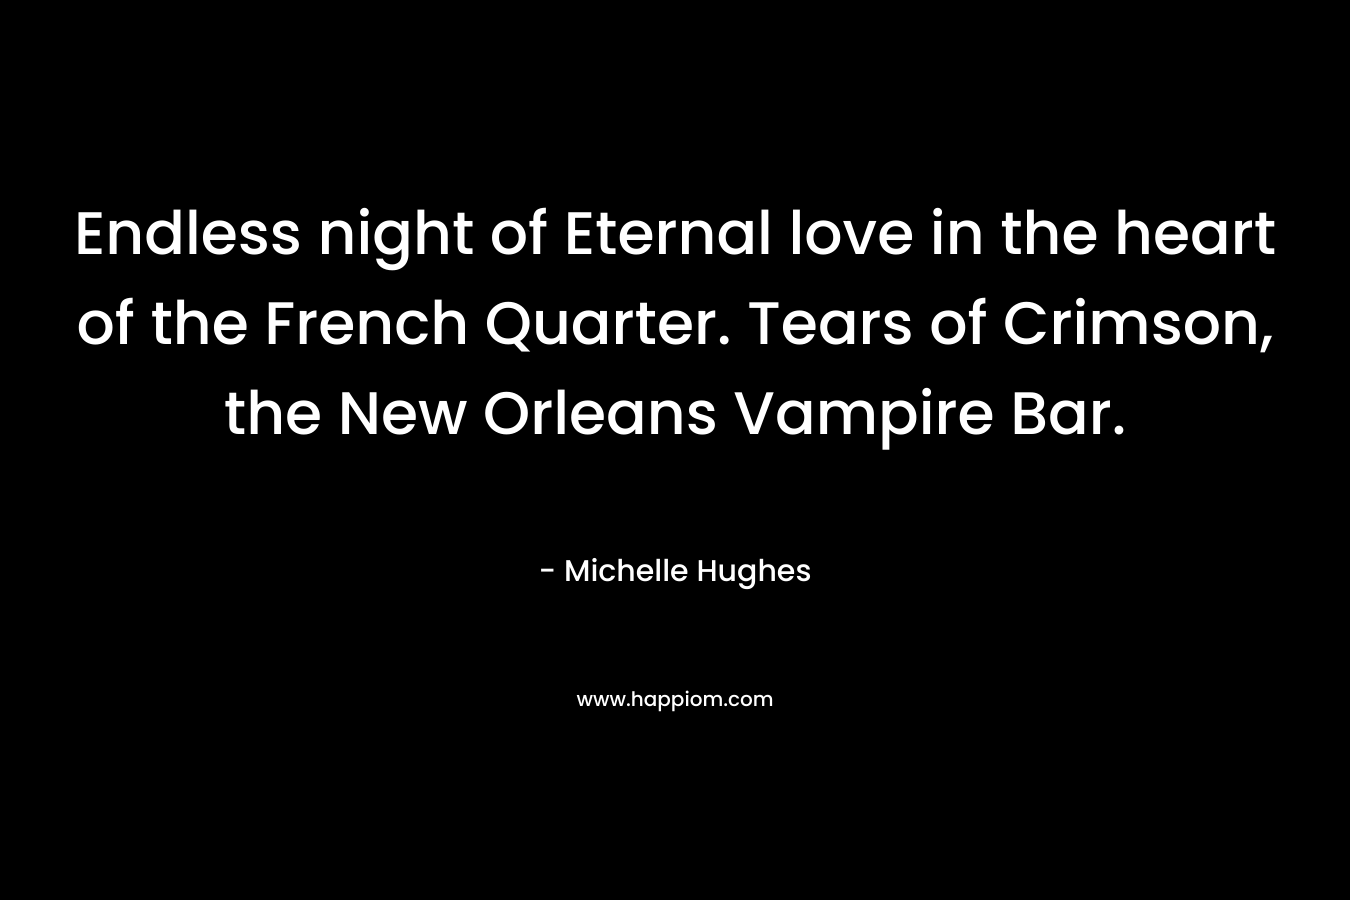 Endless night of Eternal love in the heart of the French Quarter. Tears of Crimson, the New Orleans Vampire Bar. – Michelle Hughes